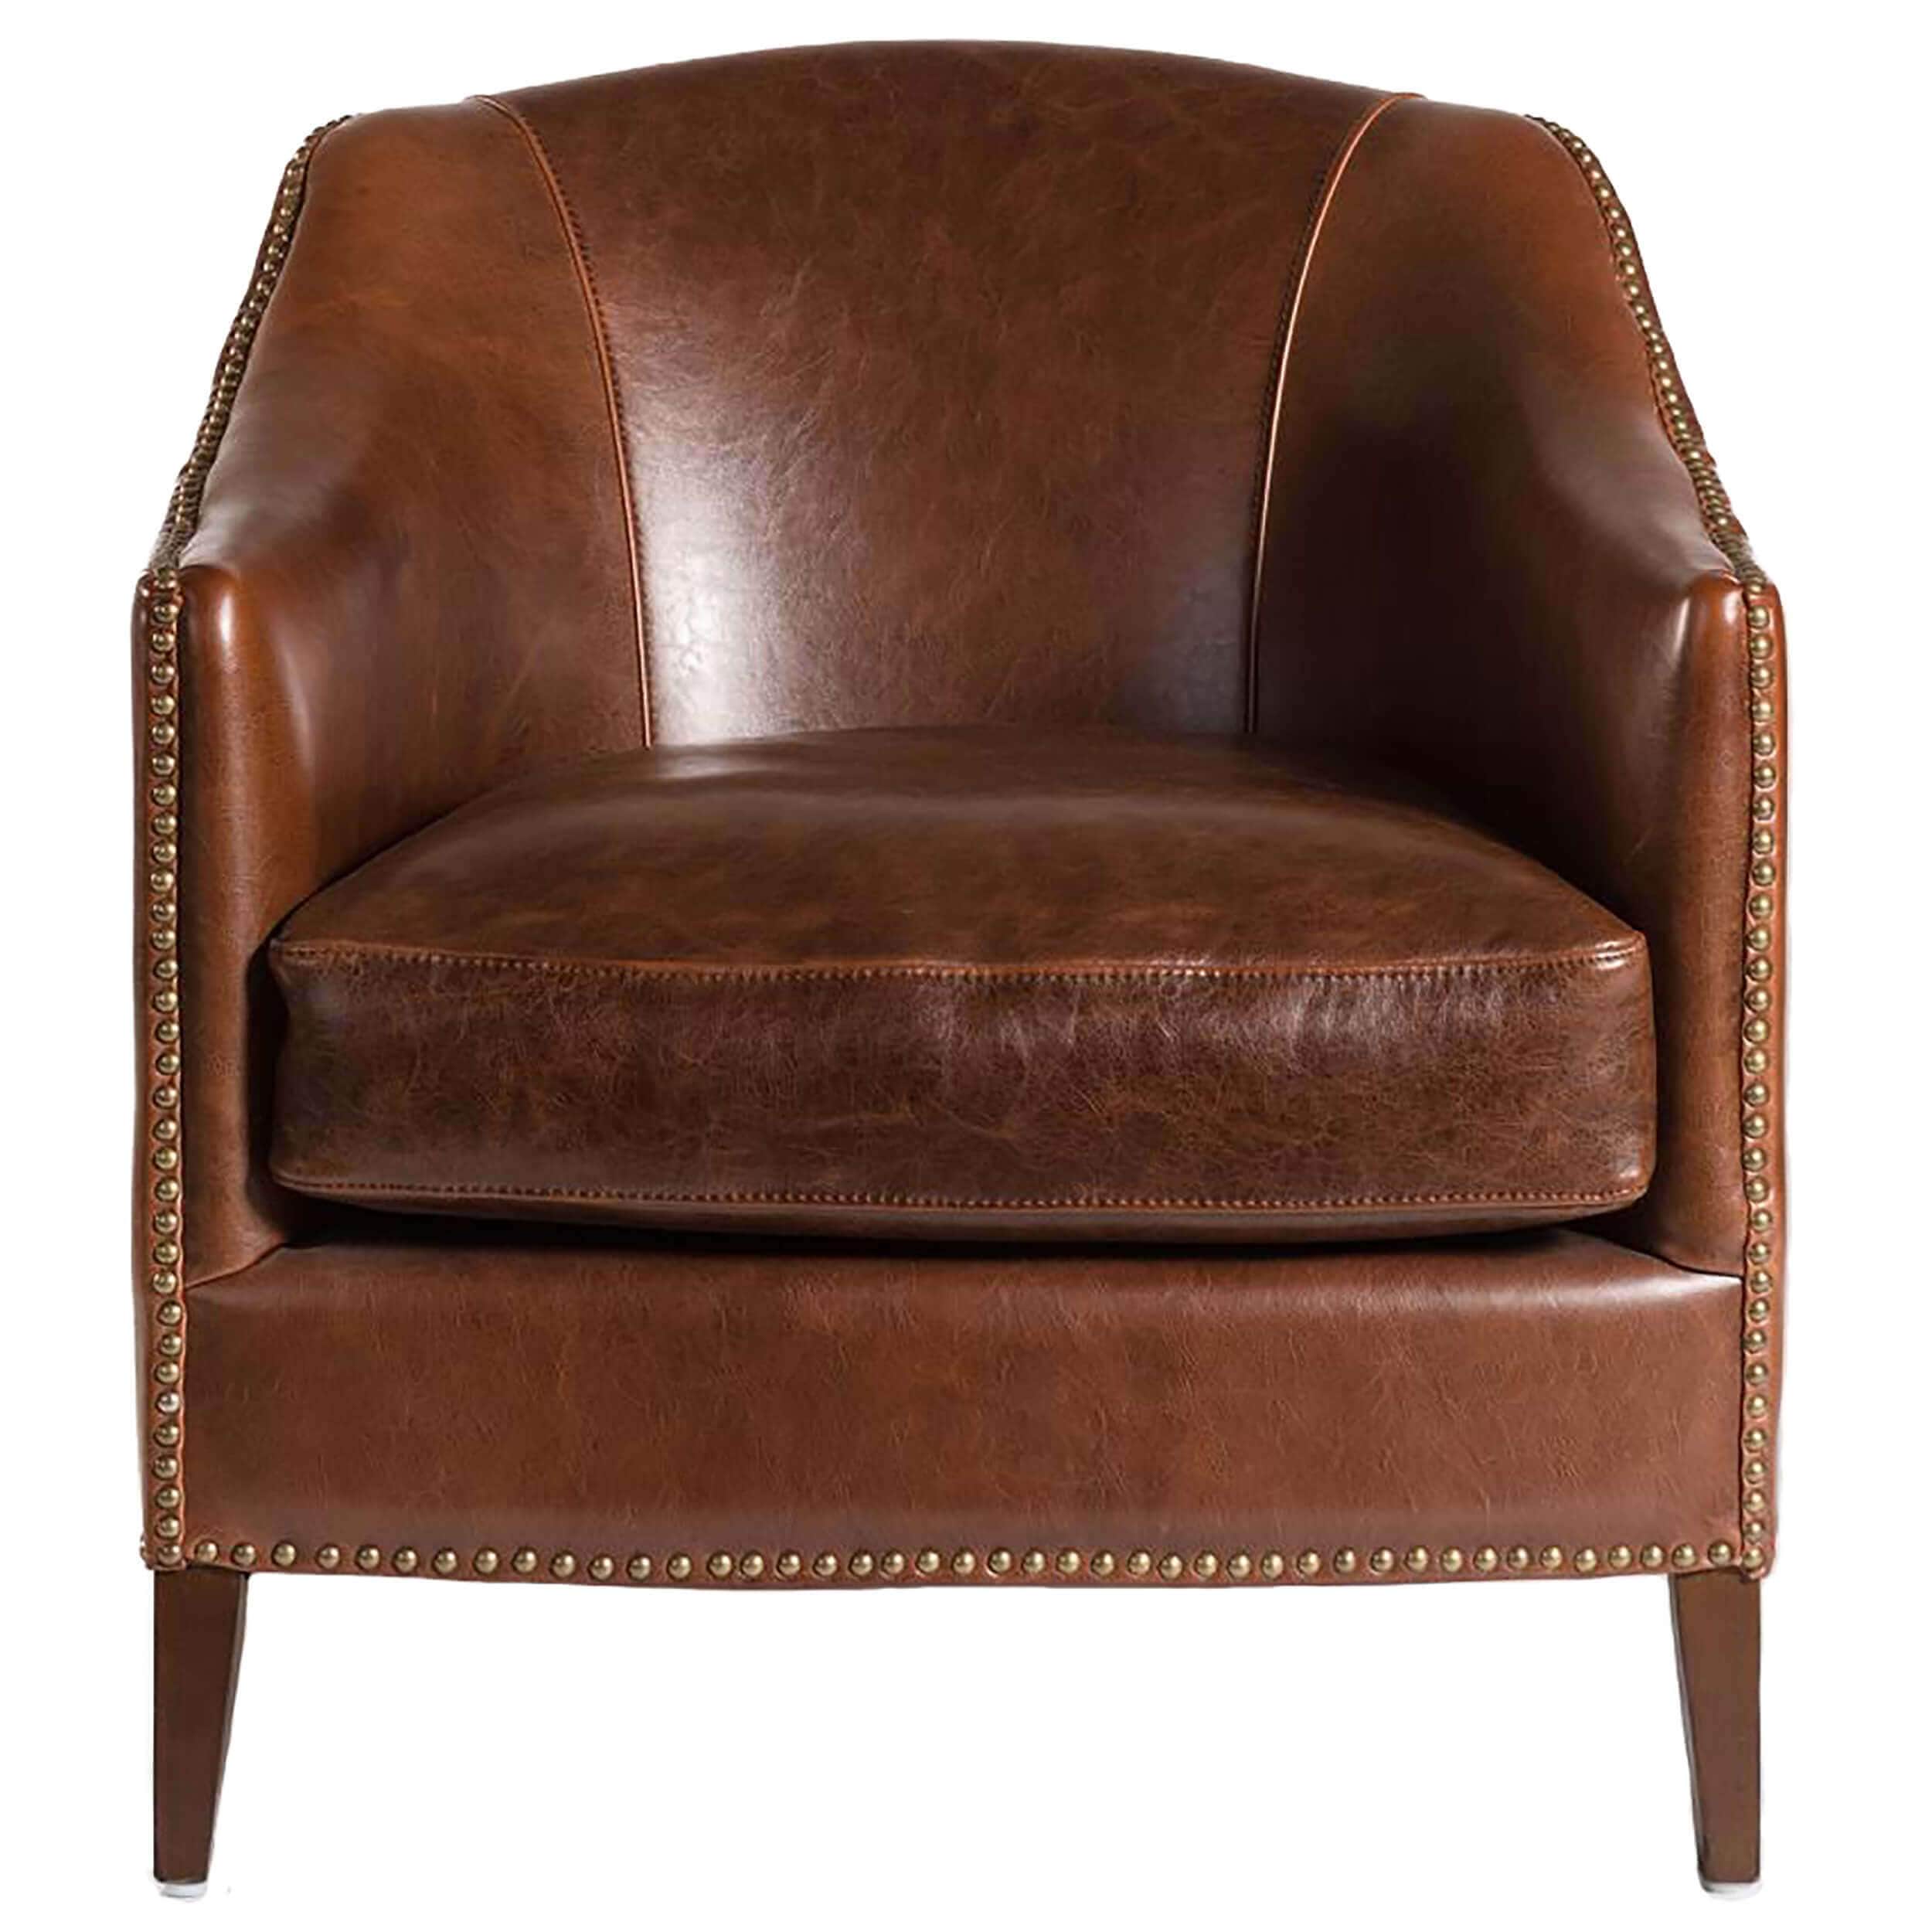 Image of Madison Leather Chair, Antique Saddle